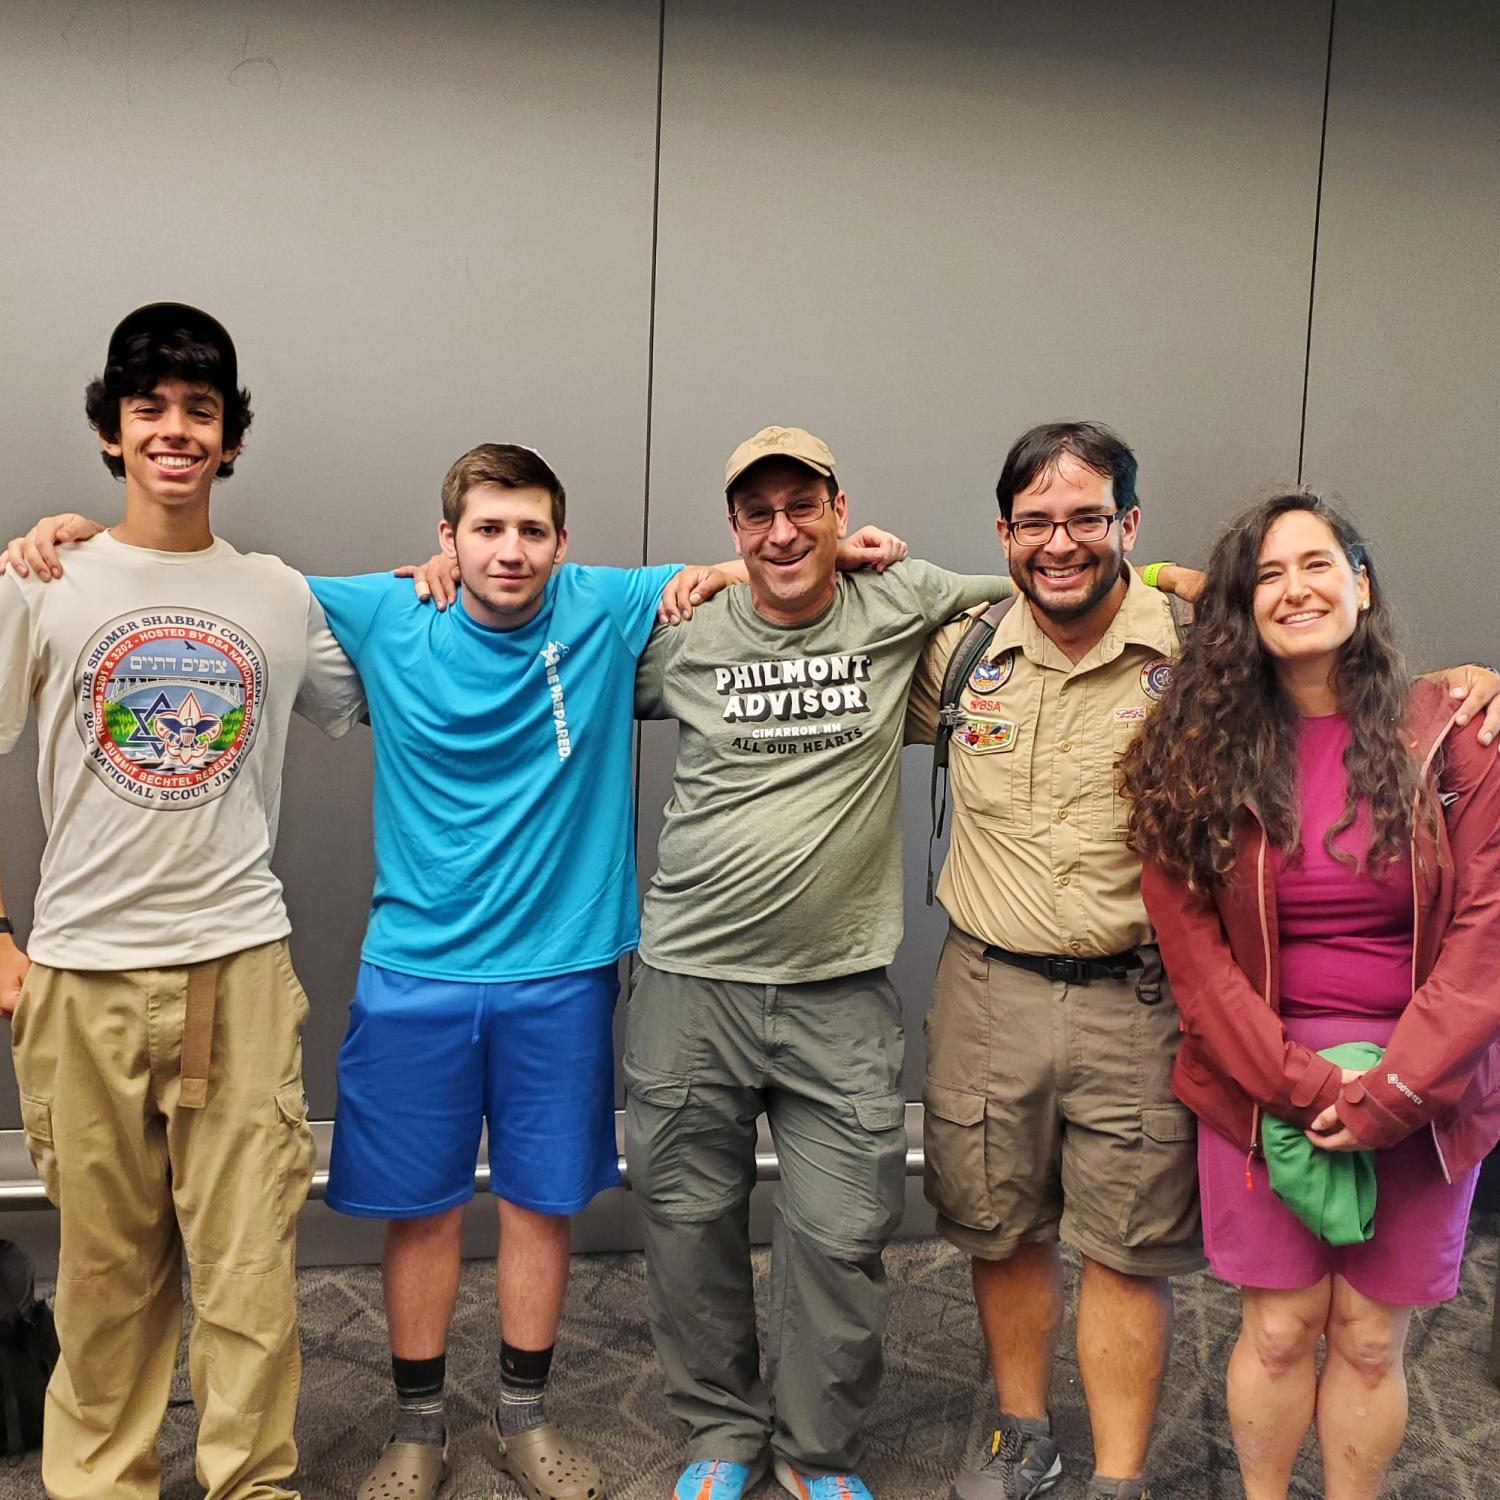 30,000 feet in air, Jewish scouts from New York, New Jersey perform CPR to save a life